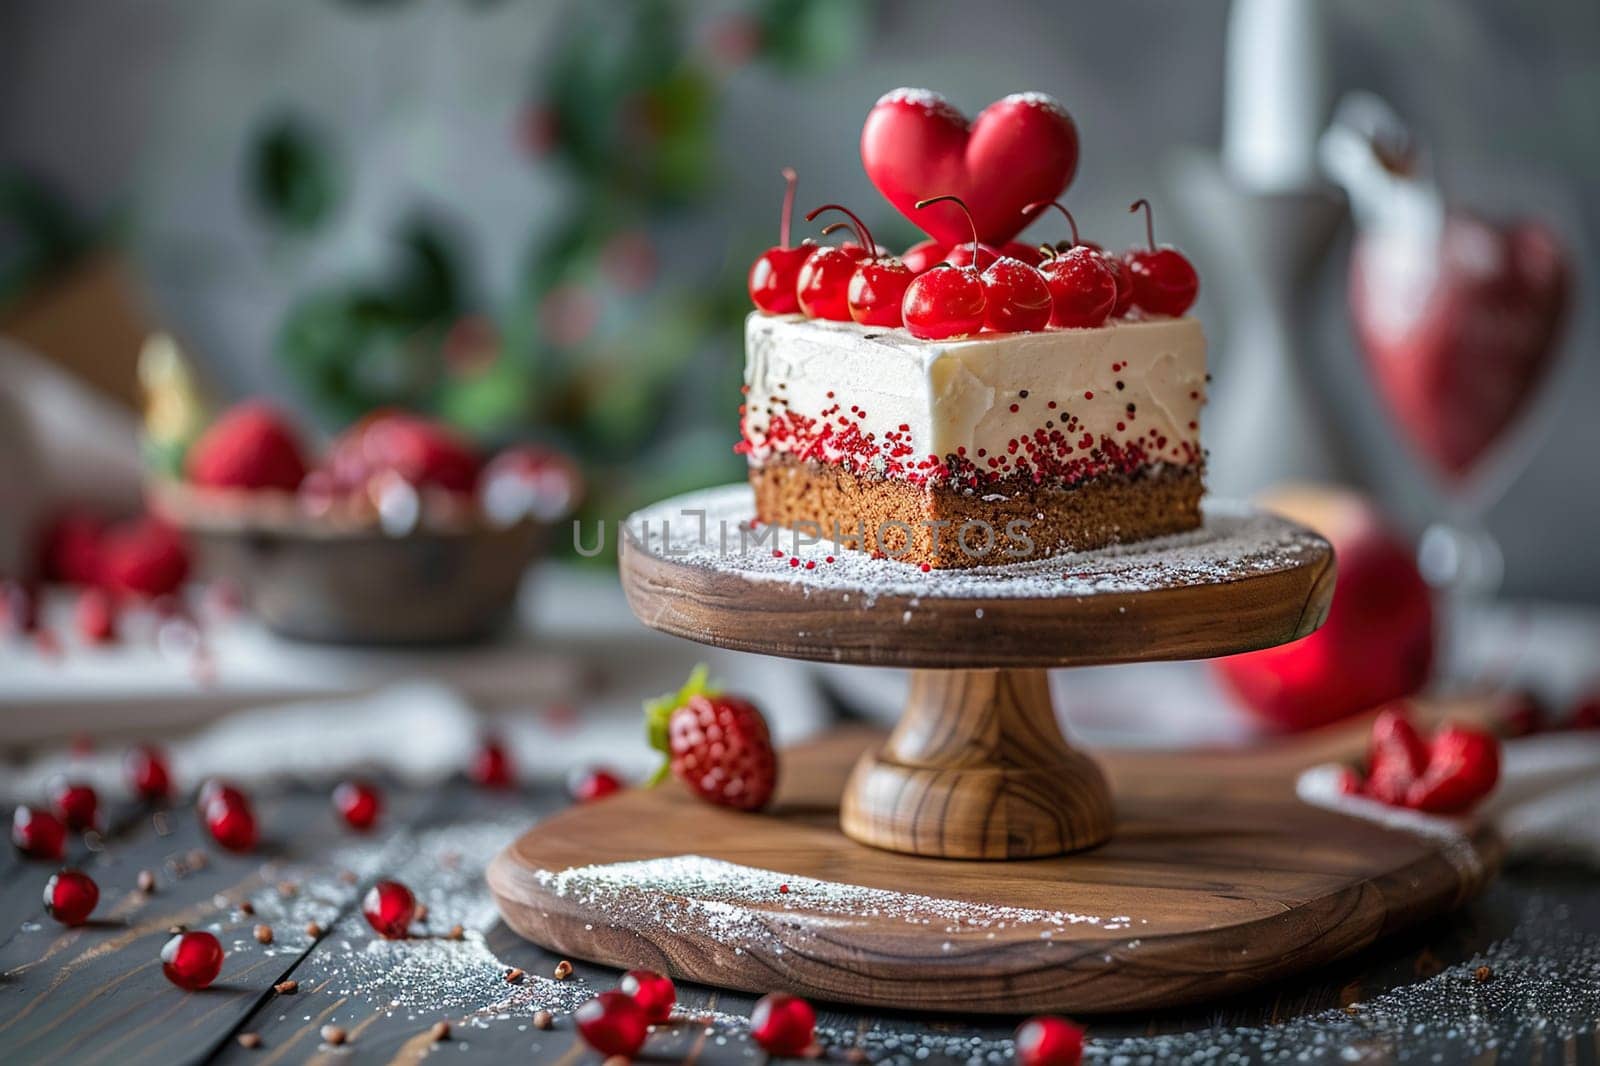 Heart-shaped cake on a wooden stand with decor. Concept for celebrating birthday, Valentine's Day, Mother's Day or March 8th, cake day. Generated by artificial intelligence by Vovmar